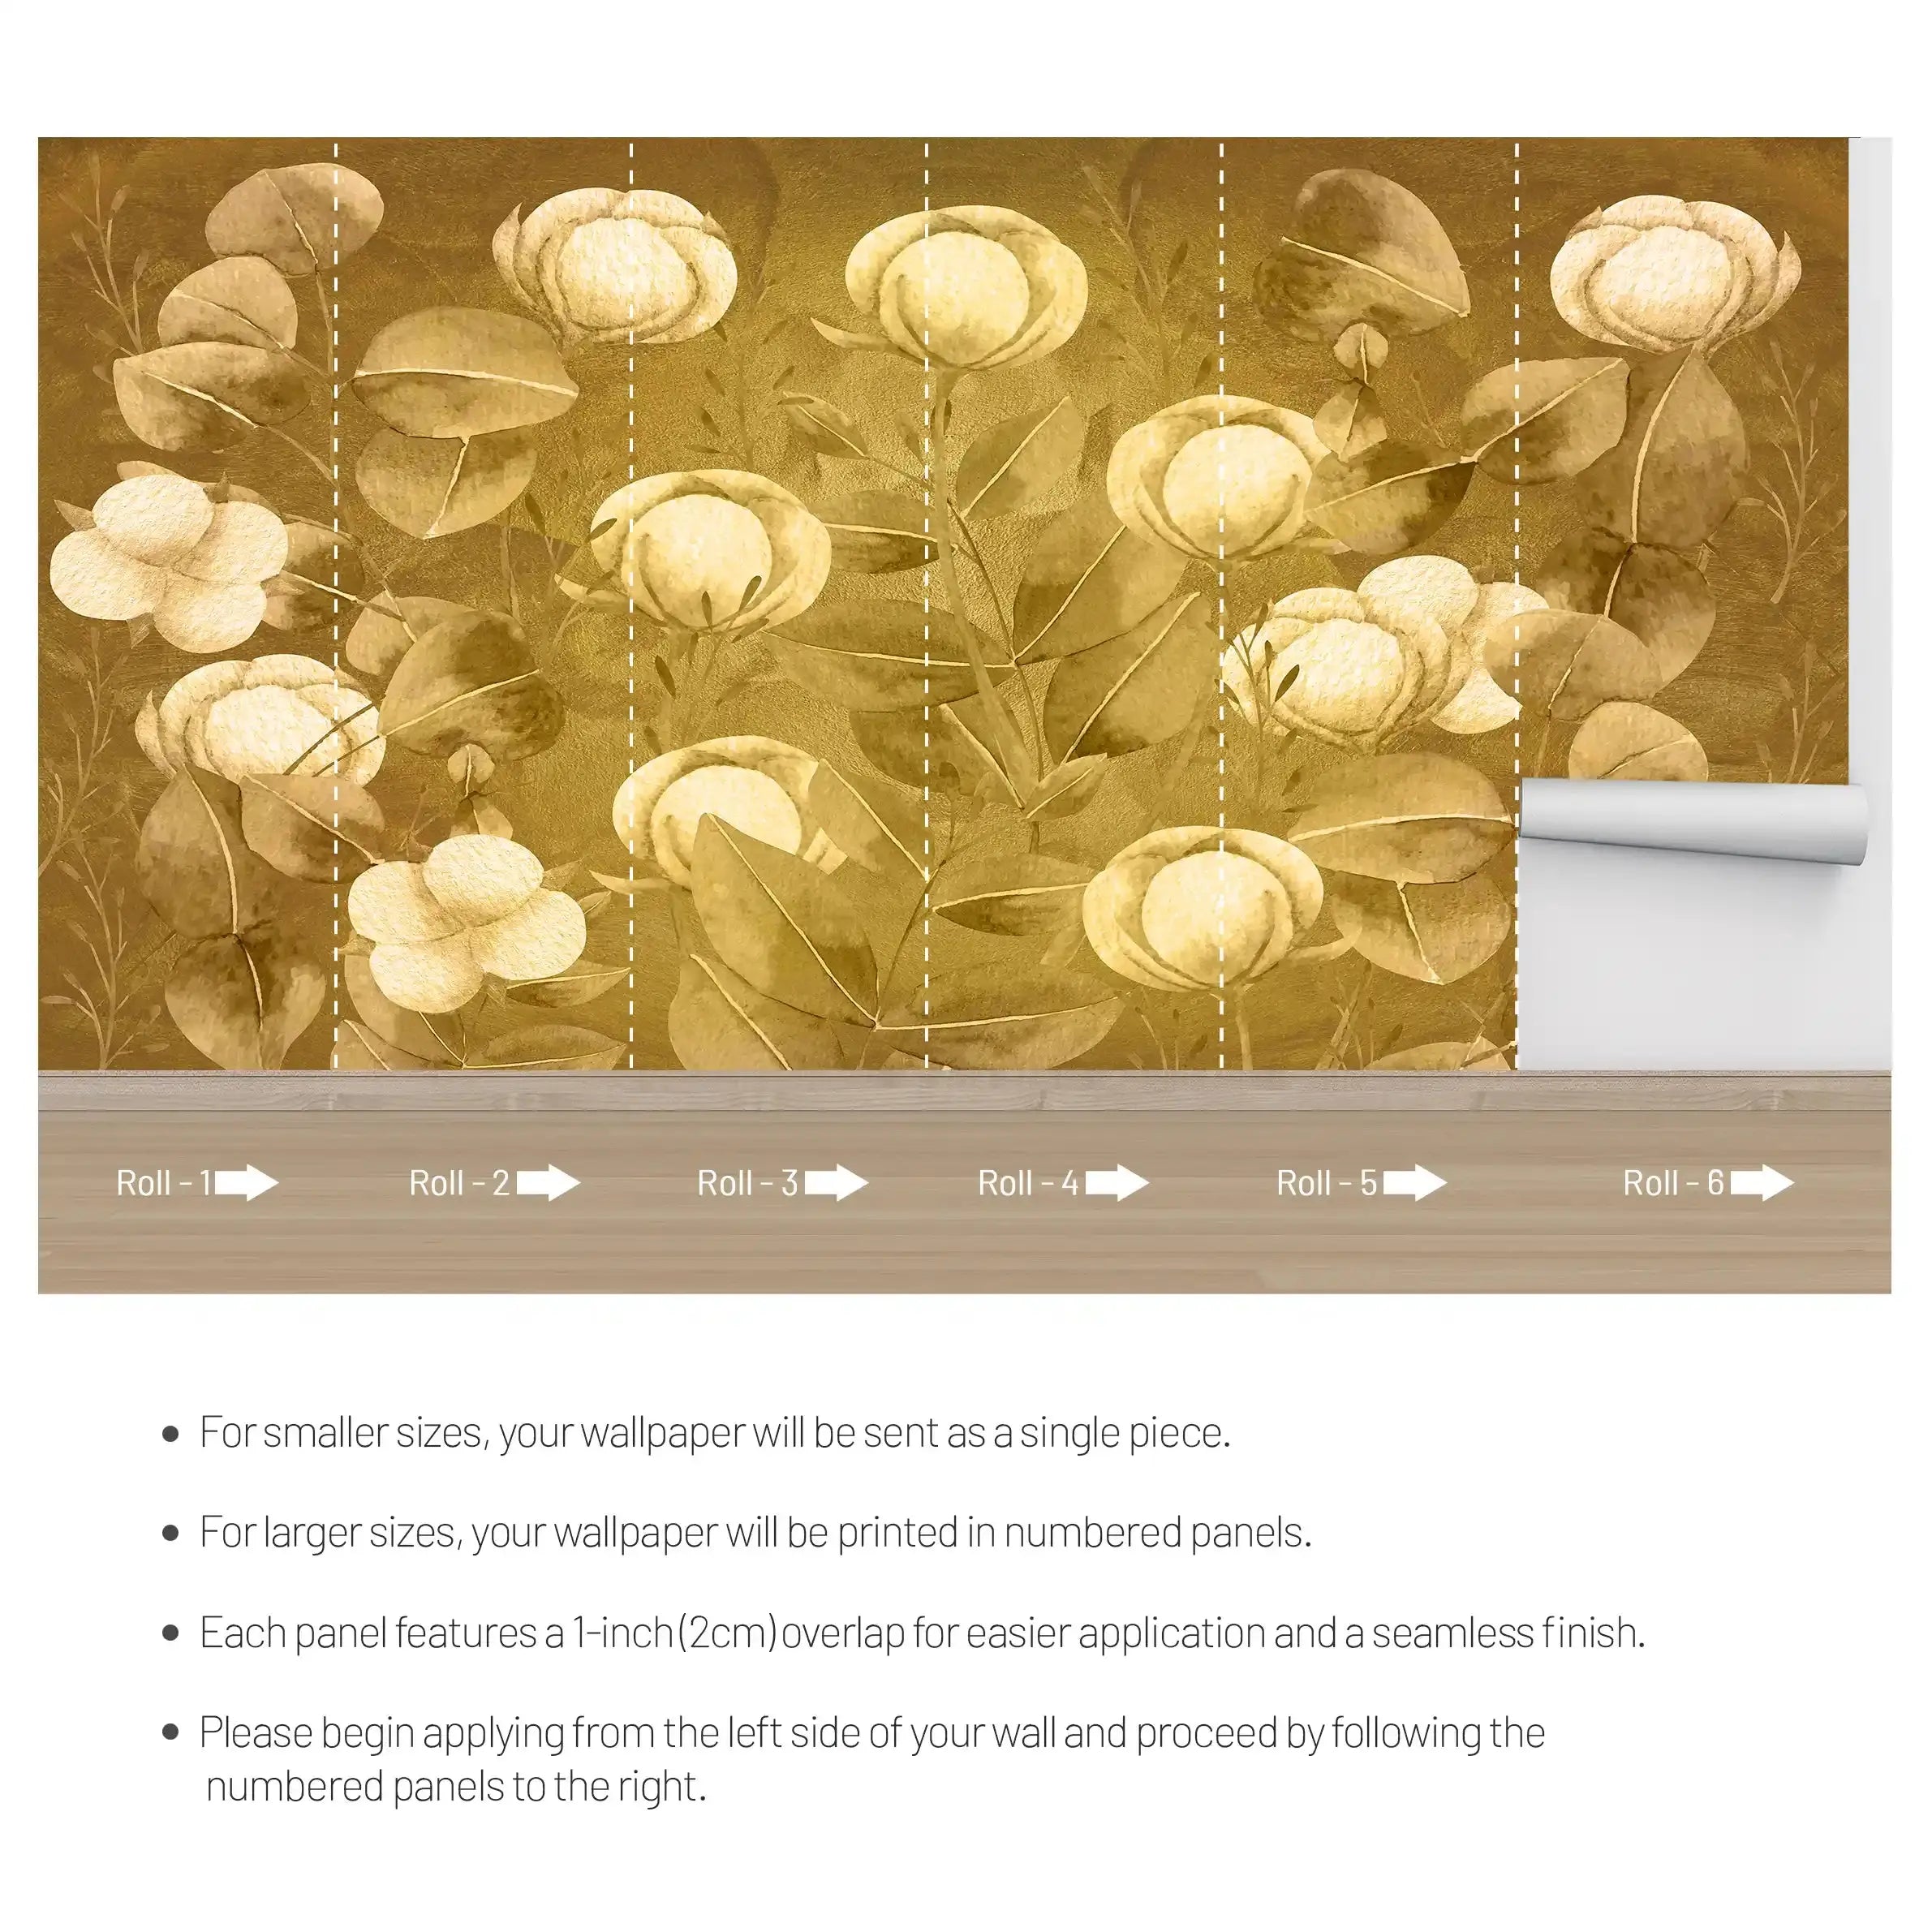 3035-A / Floral Wall Decor: Peelable, Stickable Wallpaper with Tulips Design on Gold Background, Ideal for Room Decor - Artevella